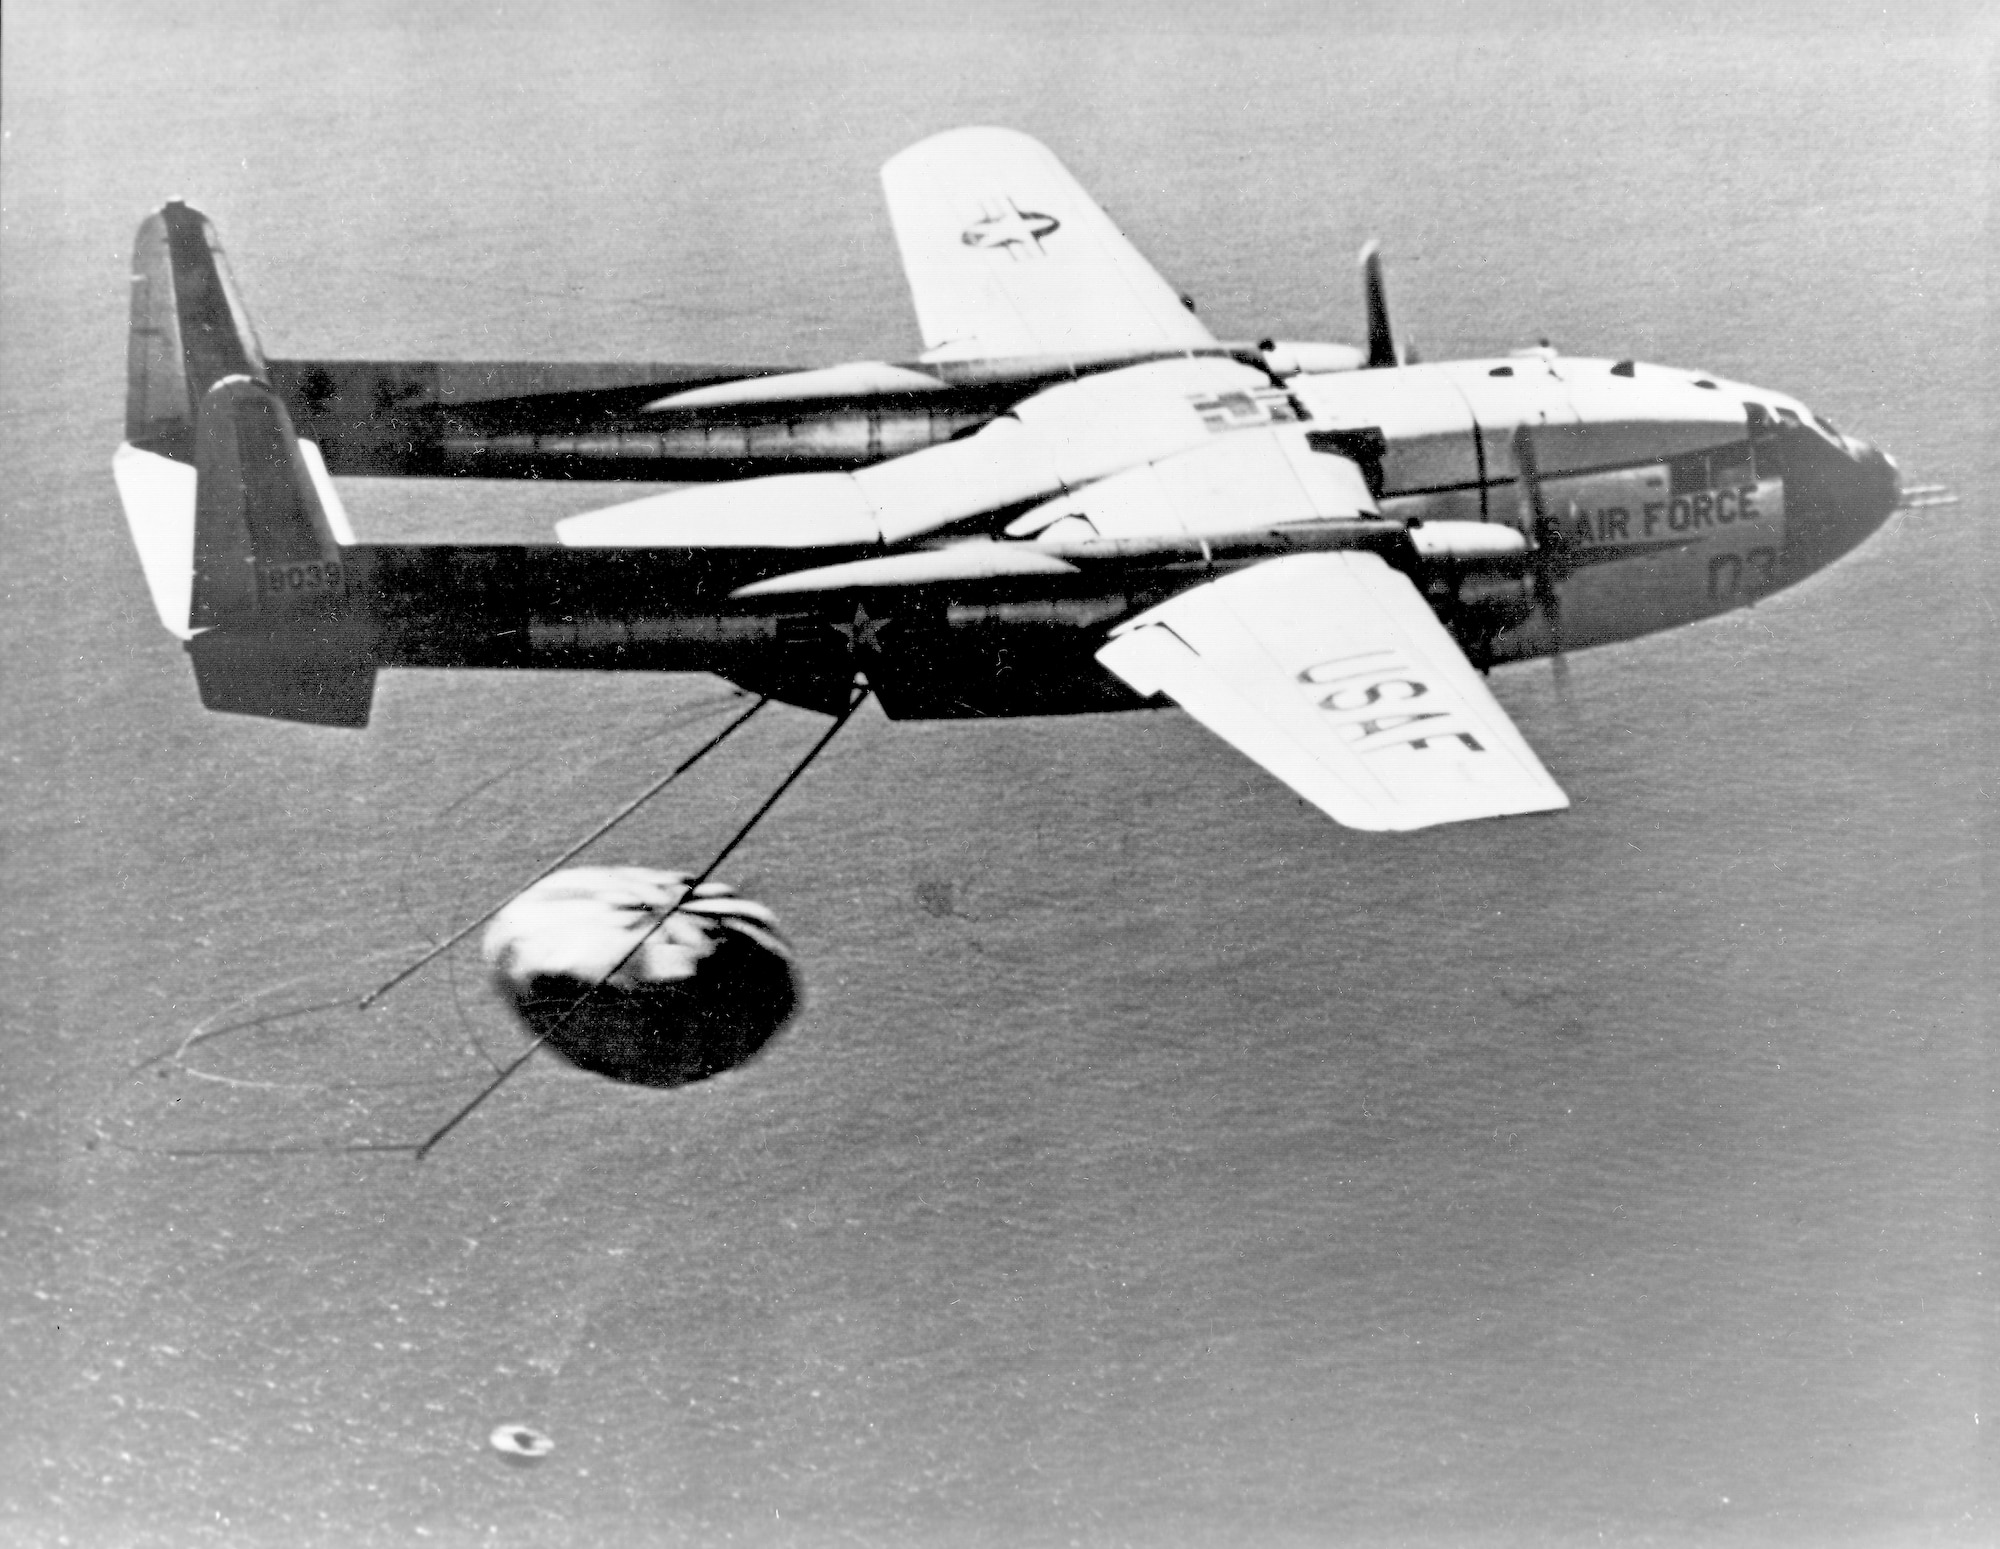 On Aug. 19, 1960, a C-119J Flying Boxcar made the world's first midair recovery of a capsule returning from orbit when it "snagged" the parachute lowering the Discoverer XIV satellite at 8,000 feet altitude, 360 miles southwest of Honolulu, Hawaii.  The aircraft  recovered a Corona capsule returning from Space, and was specially modified for the mid-air retrieval.  (U.S. Air Force photo)